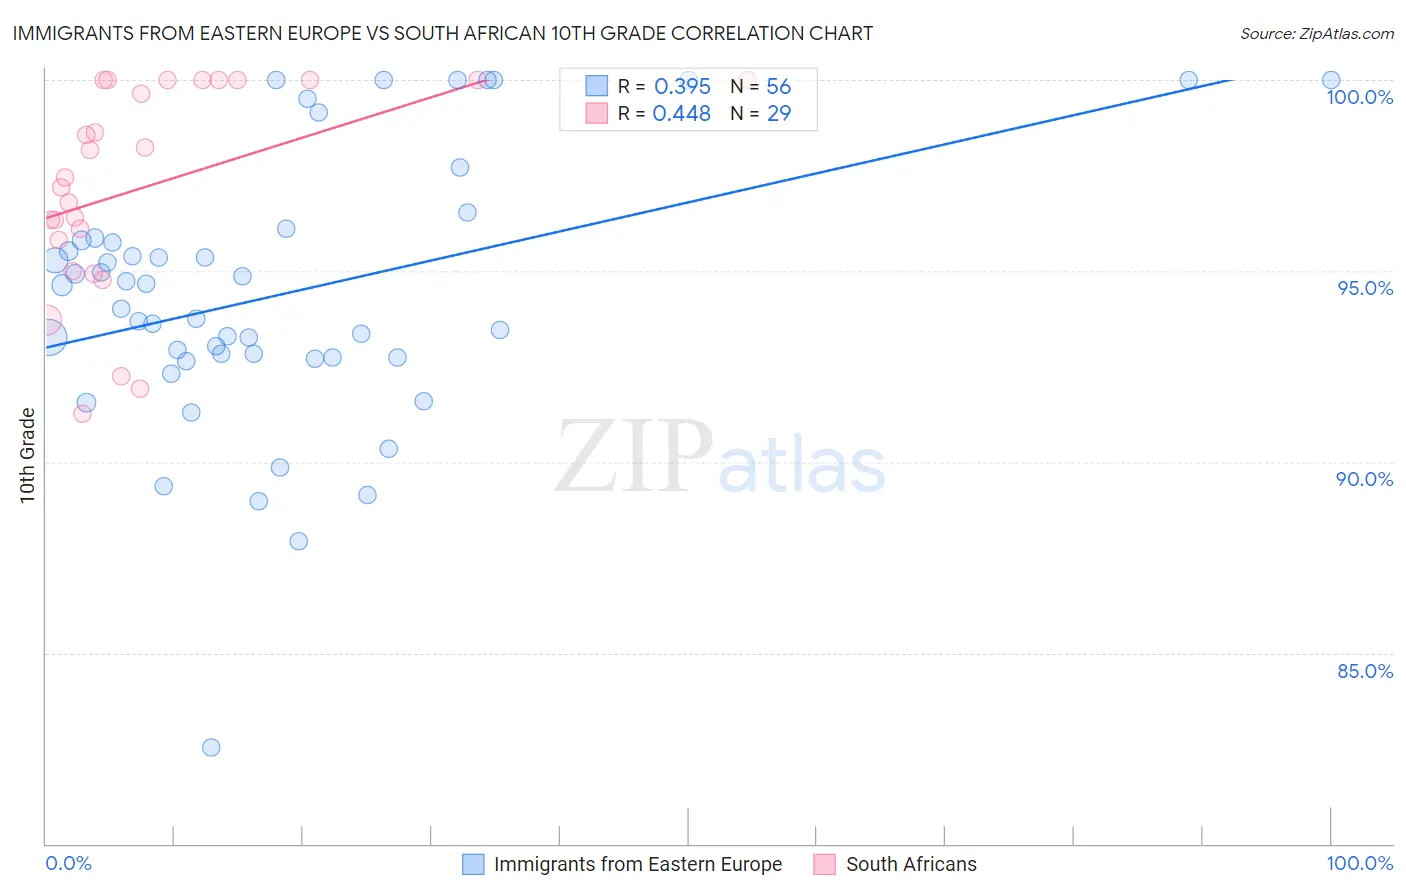 Immigrants from Eastern Europe vs South African 10th Grade